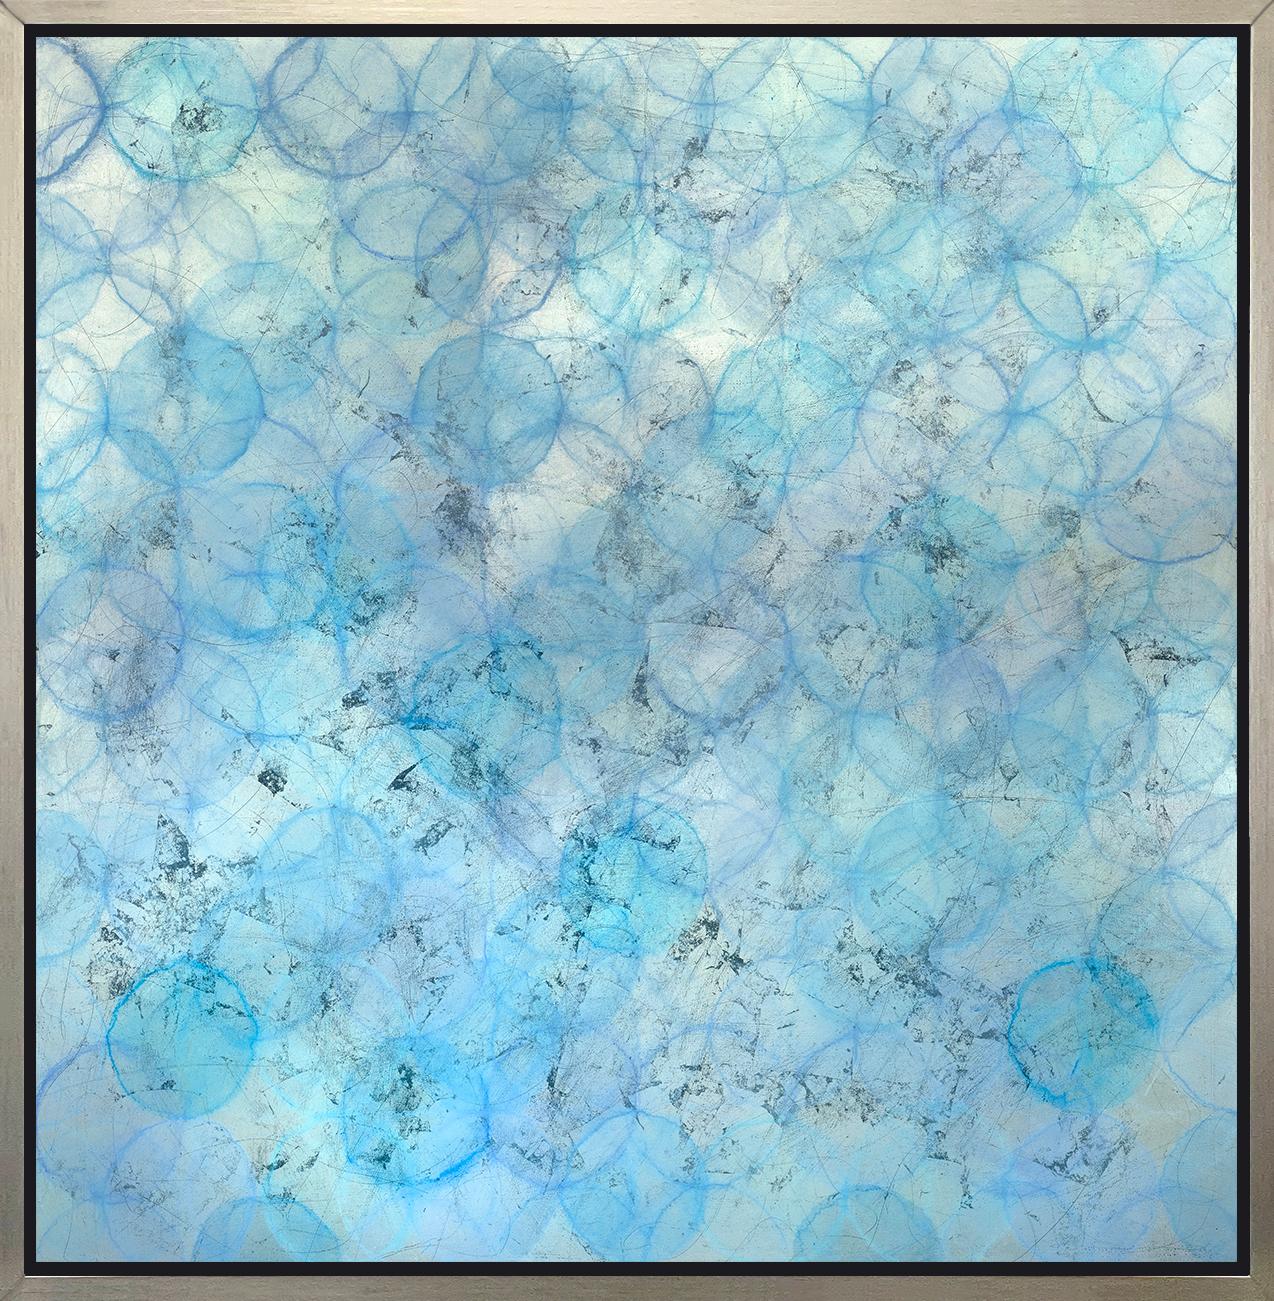 Roger Mudre Abstract Print - "Brunnera, " Framed Limited Edition Giclee Print, 53" x 53"